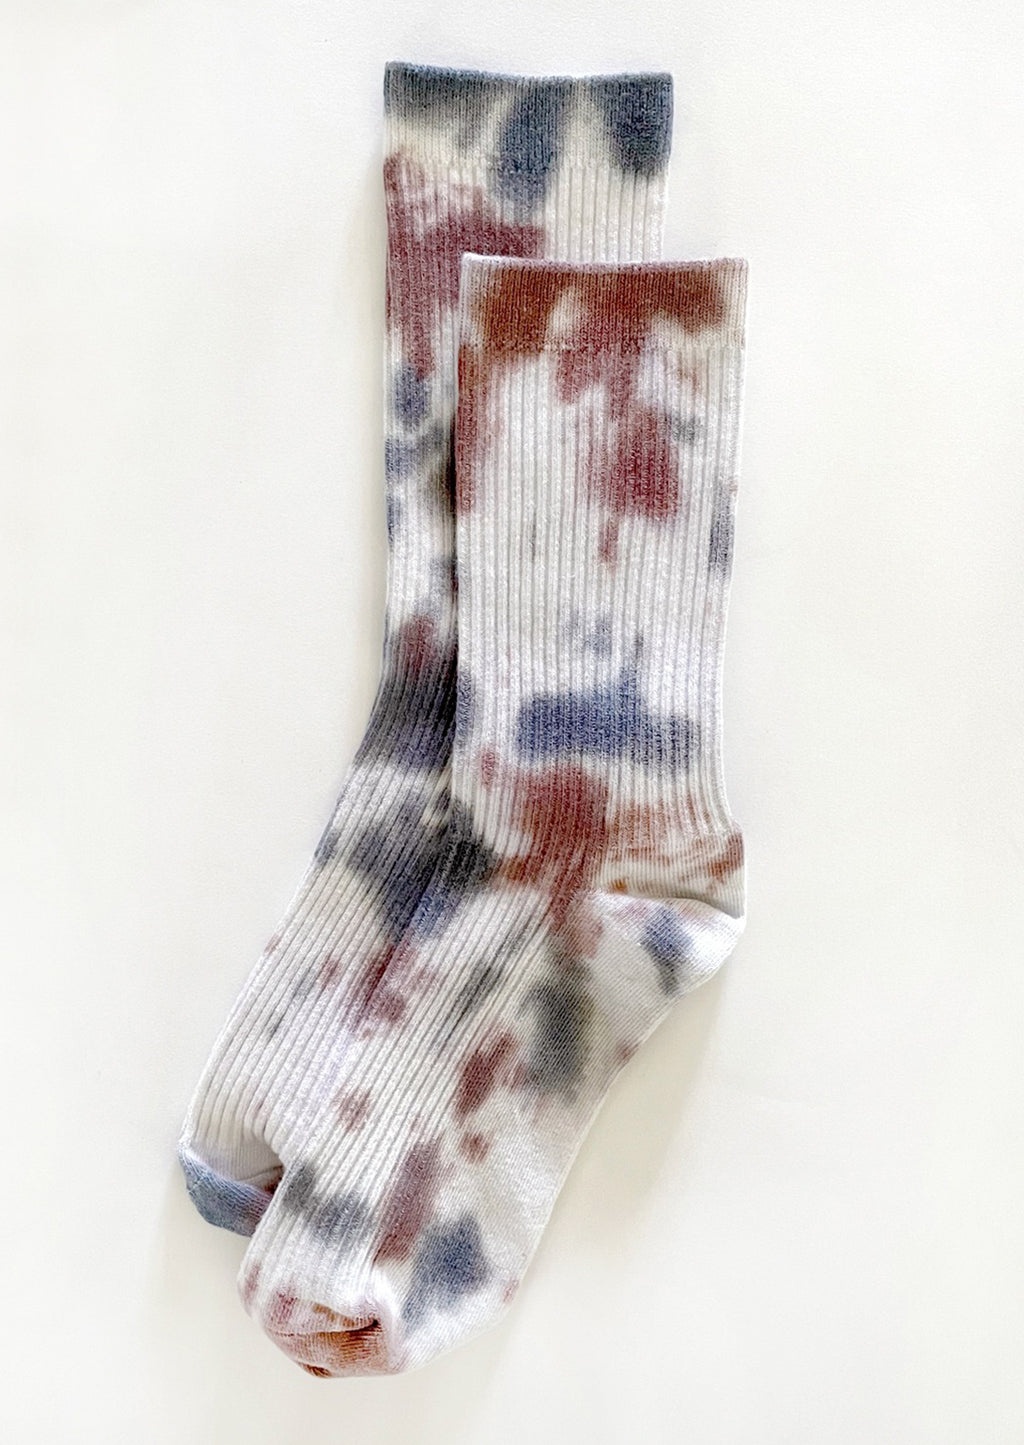 Western: A pair of tie dye socks in white with maroon and blue.